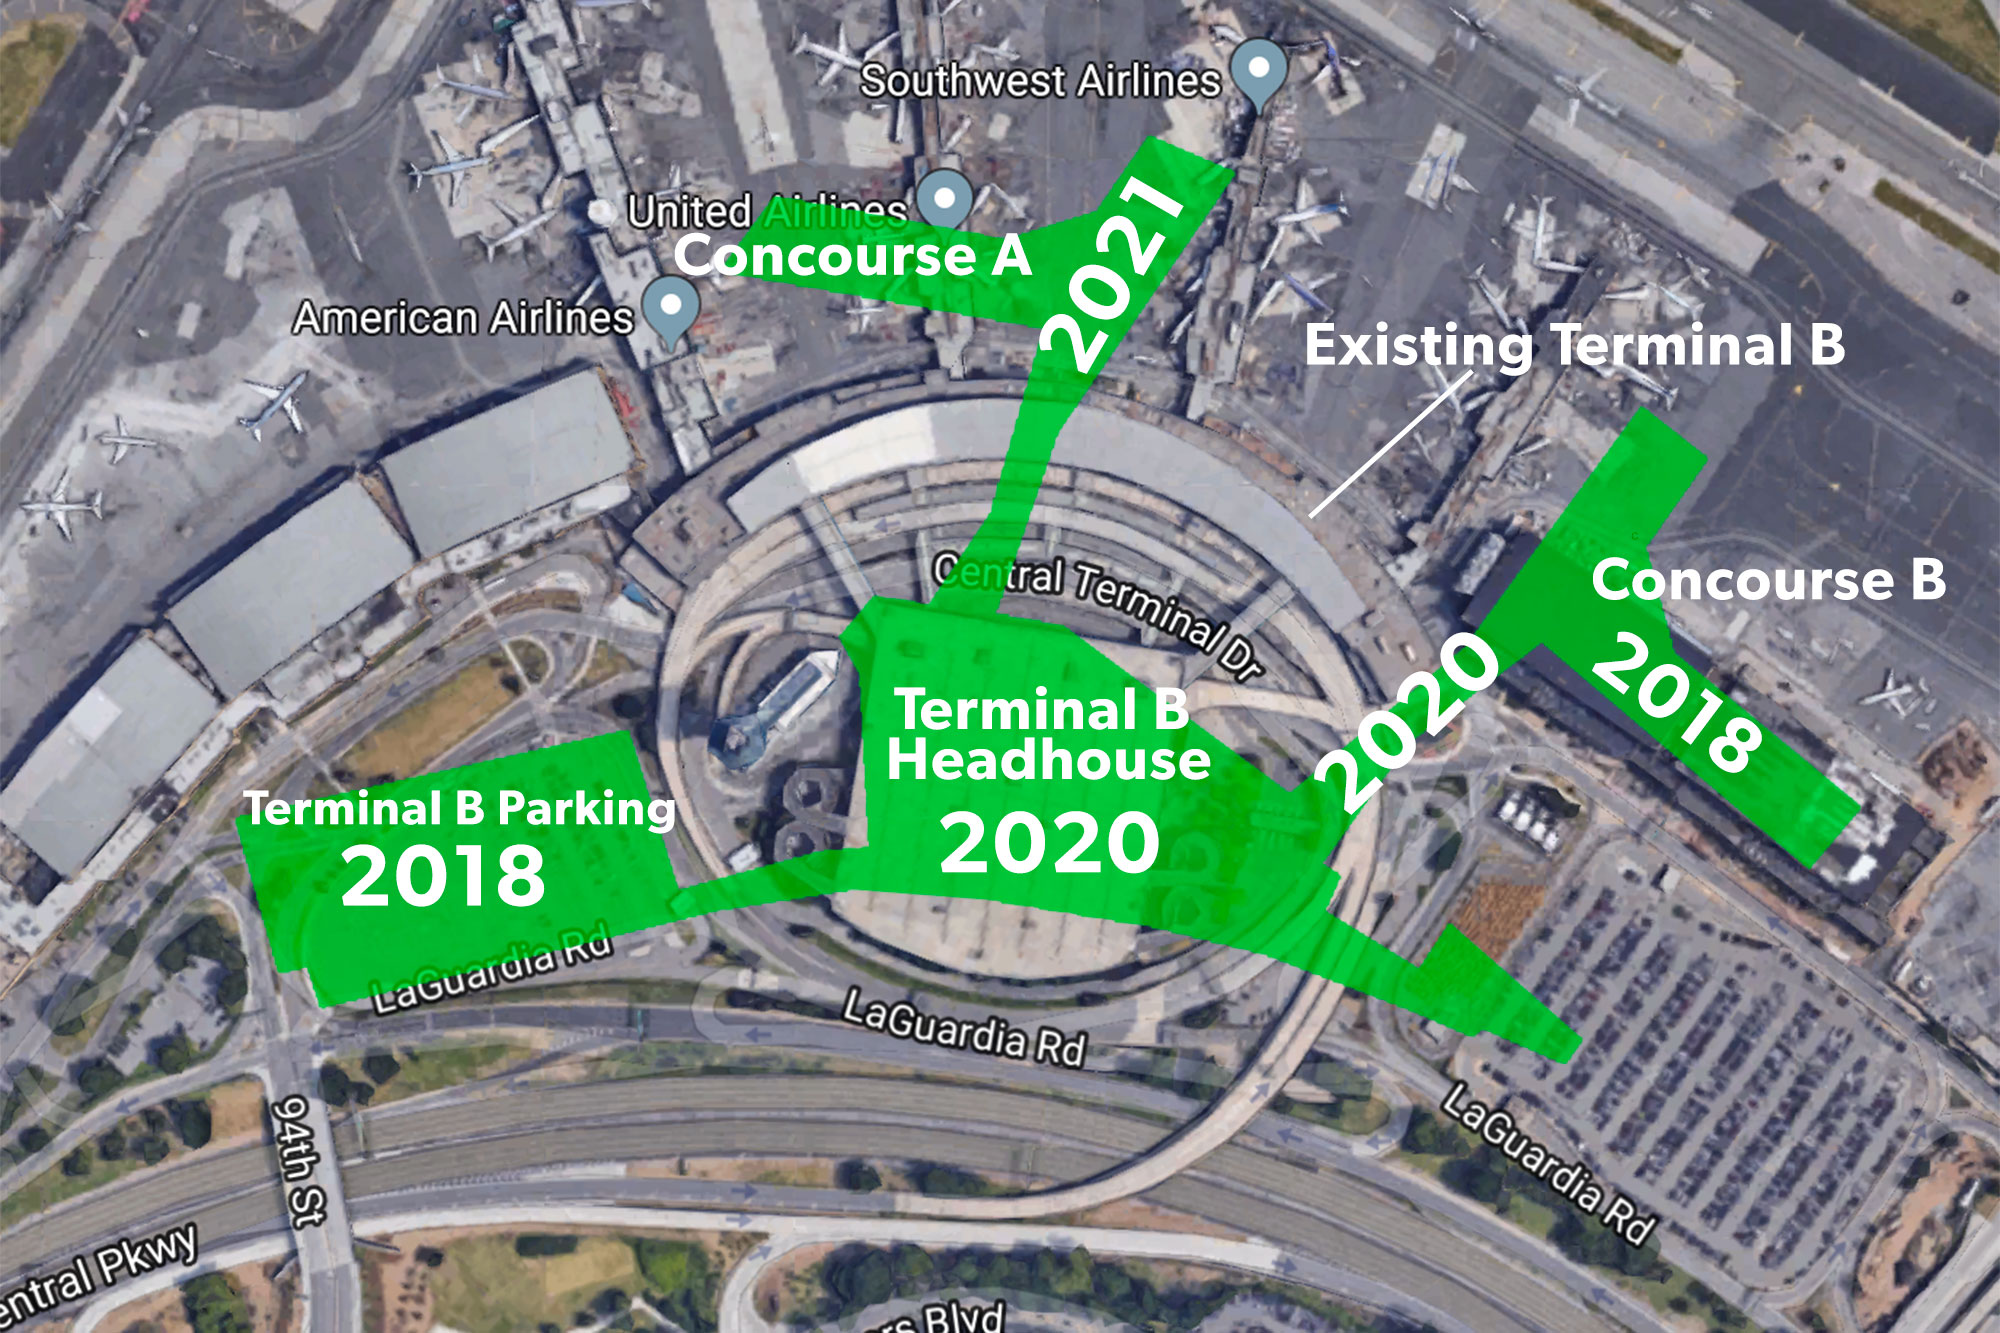 Map of construction phases and estimated completion dates for LaGuardia Terminal B, image by Mike Arnot